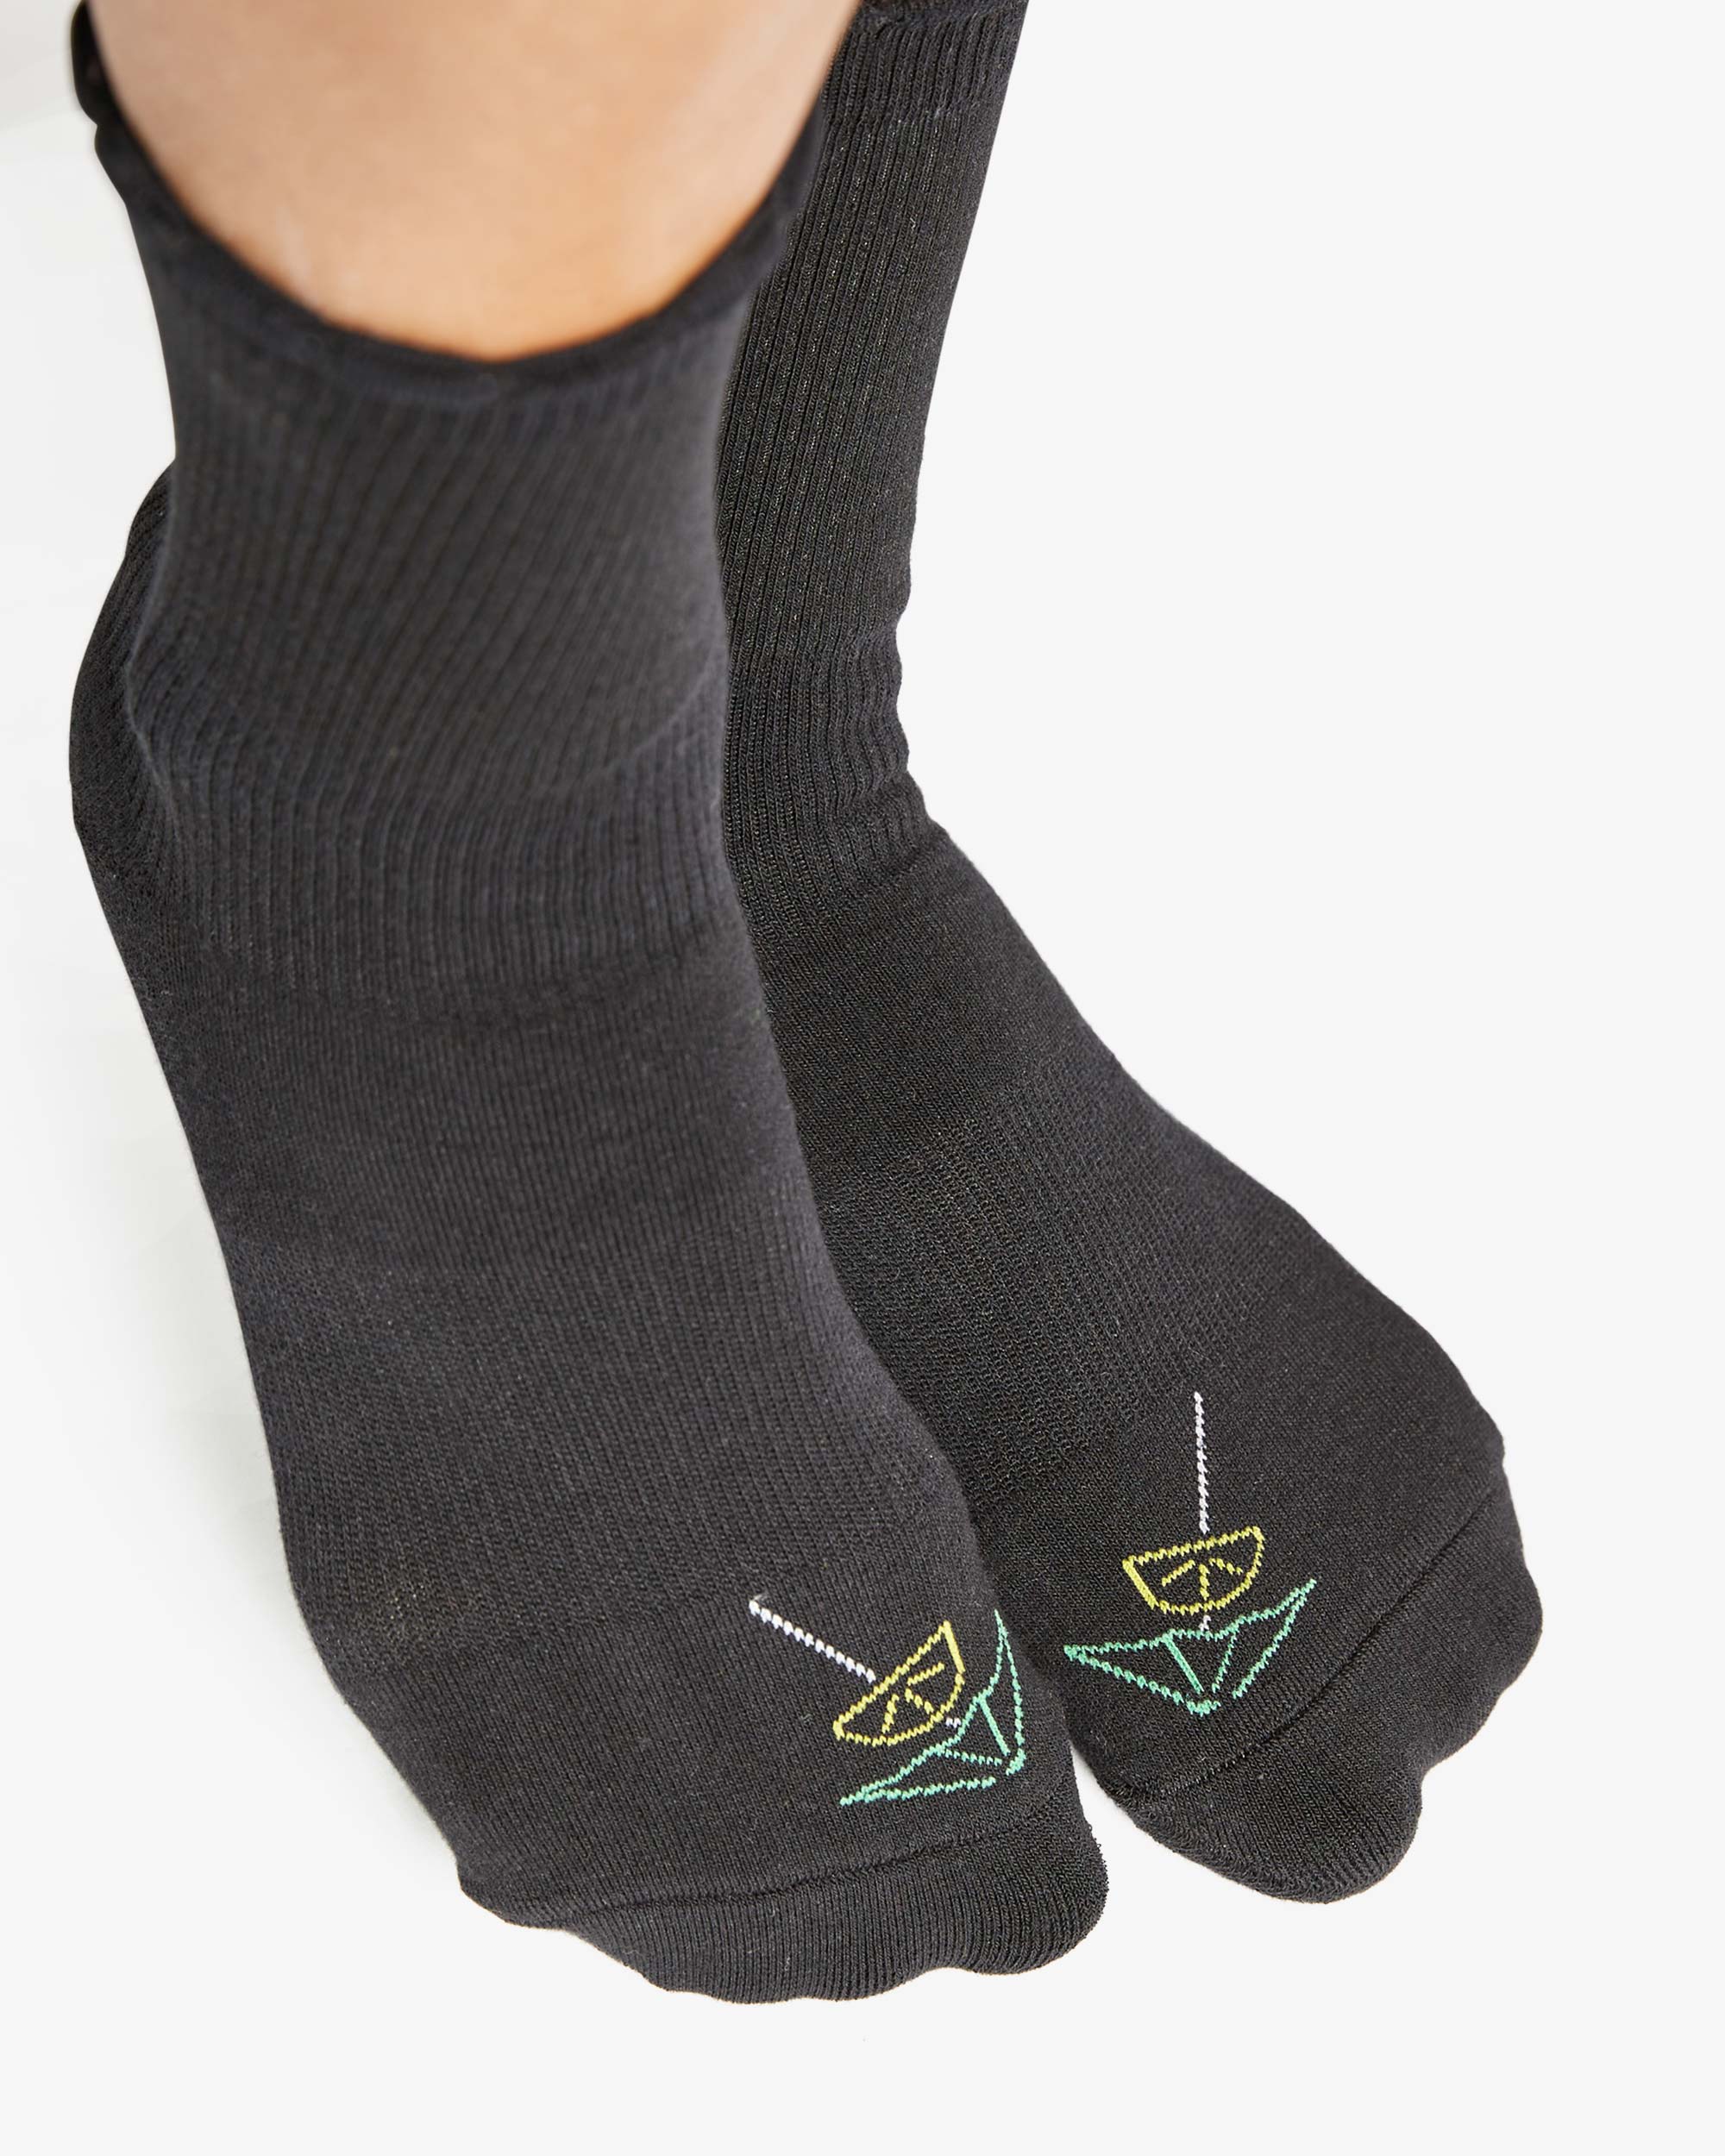 Happy Hour Crew Grip Sock  A subtle flair and extra ankle support with our crew sock; great for barre, pilates, or a pole class!